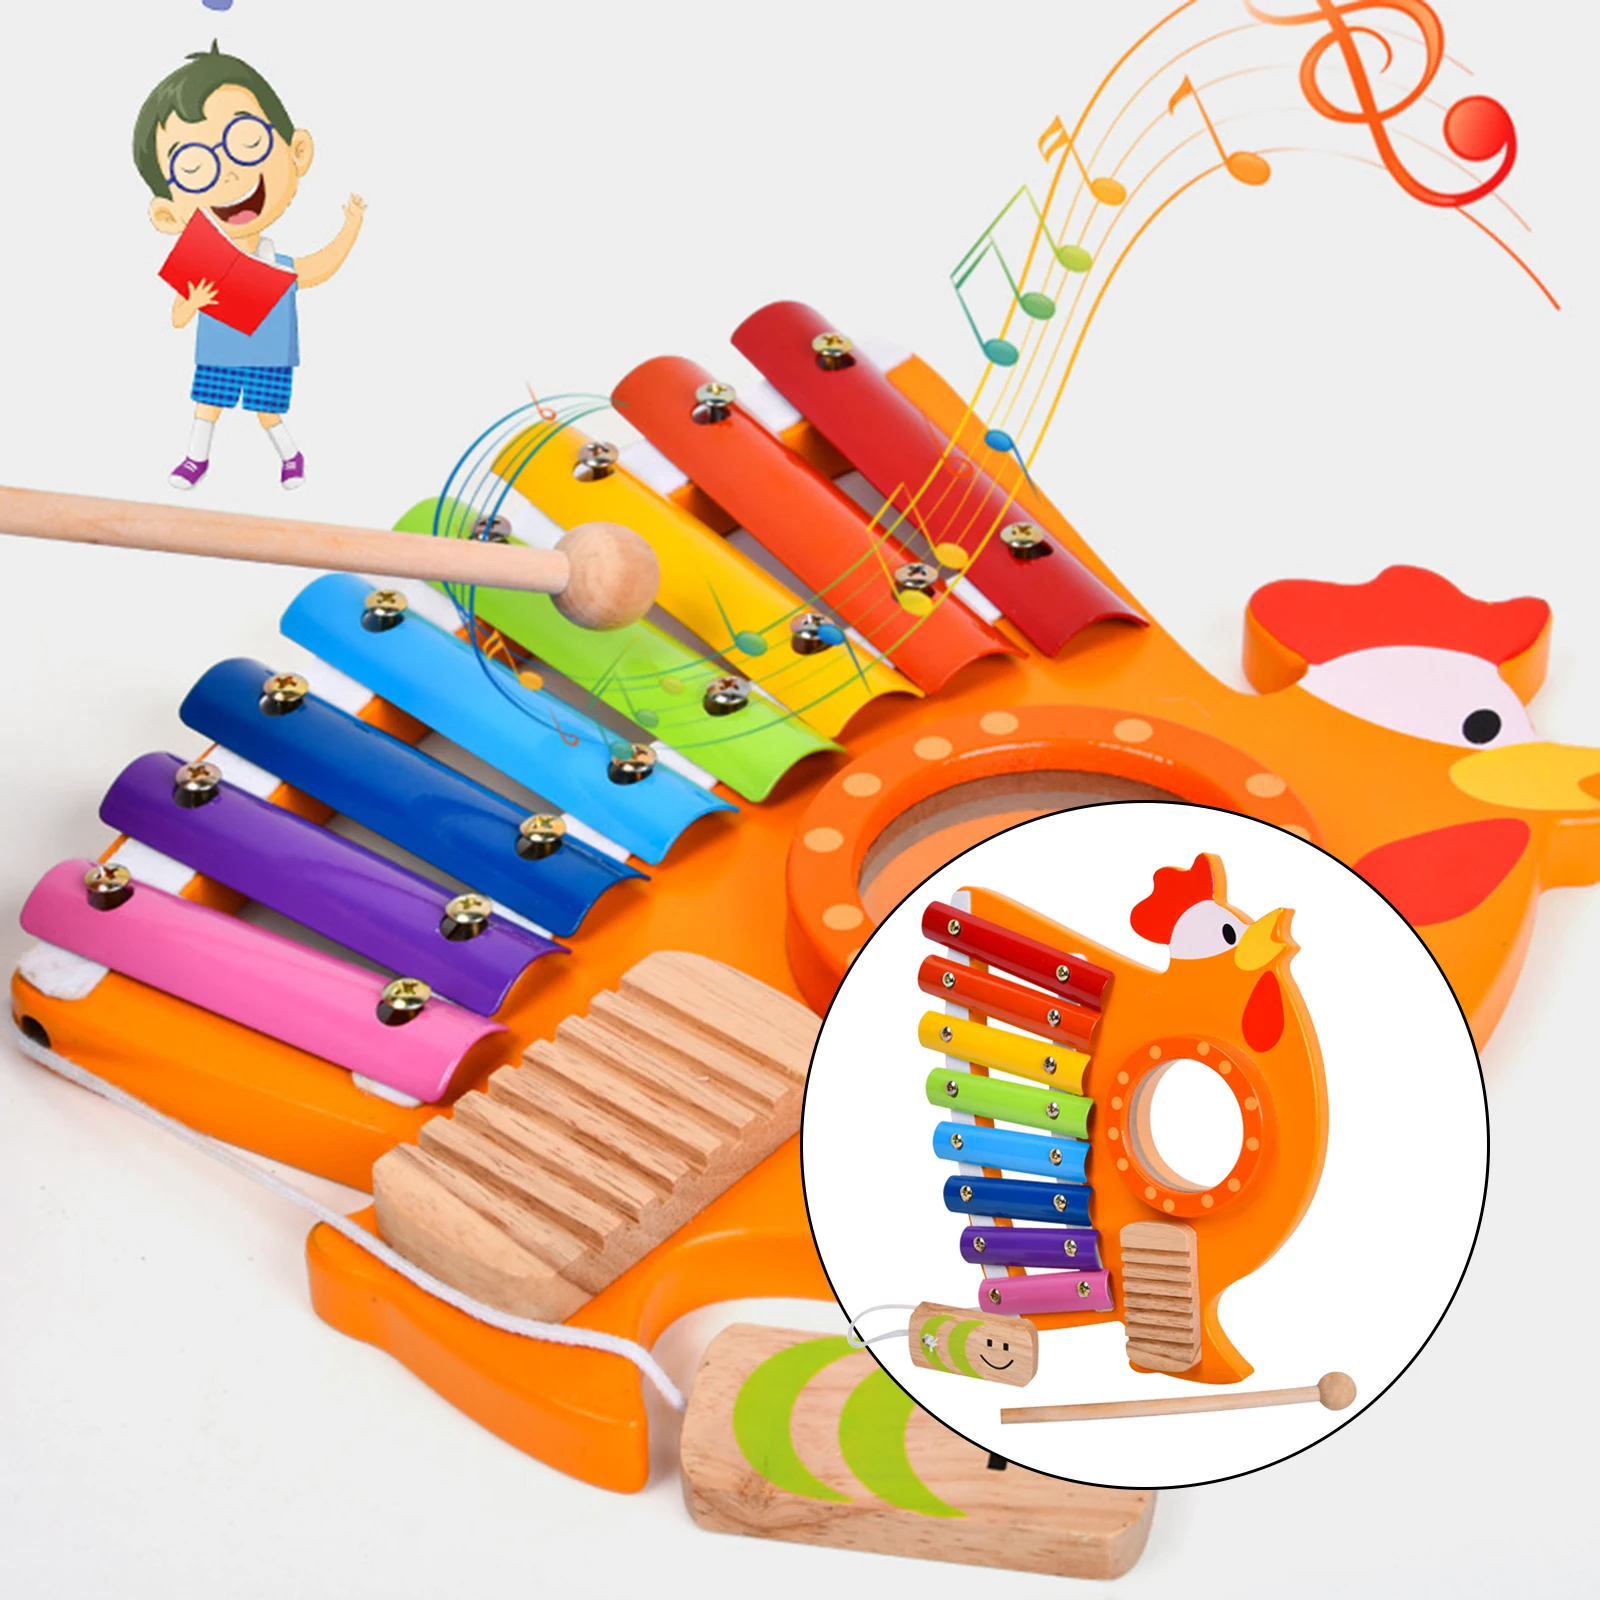 3-in-1 8 Note Xylophone Mallet Wood Percussion Rhythm Instrument Piano Glockenspiel Educational Learning Training Musical Toys